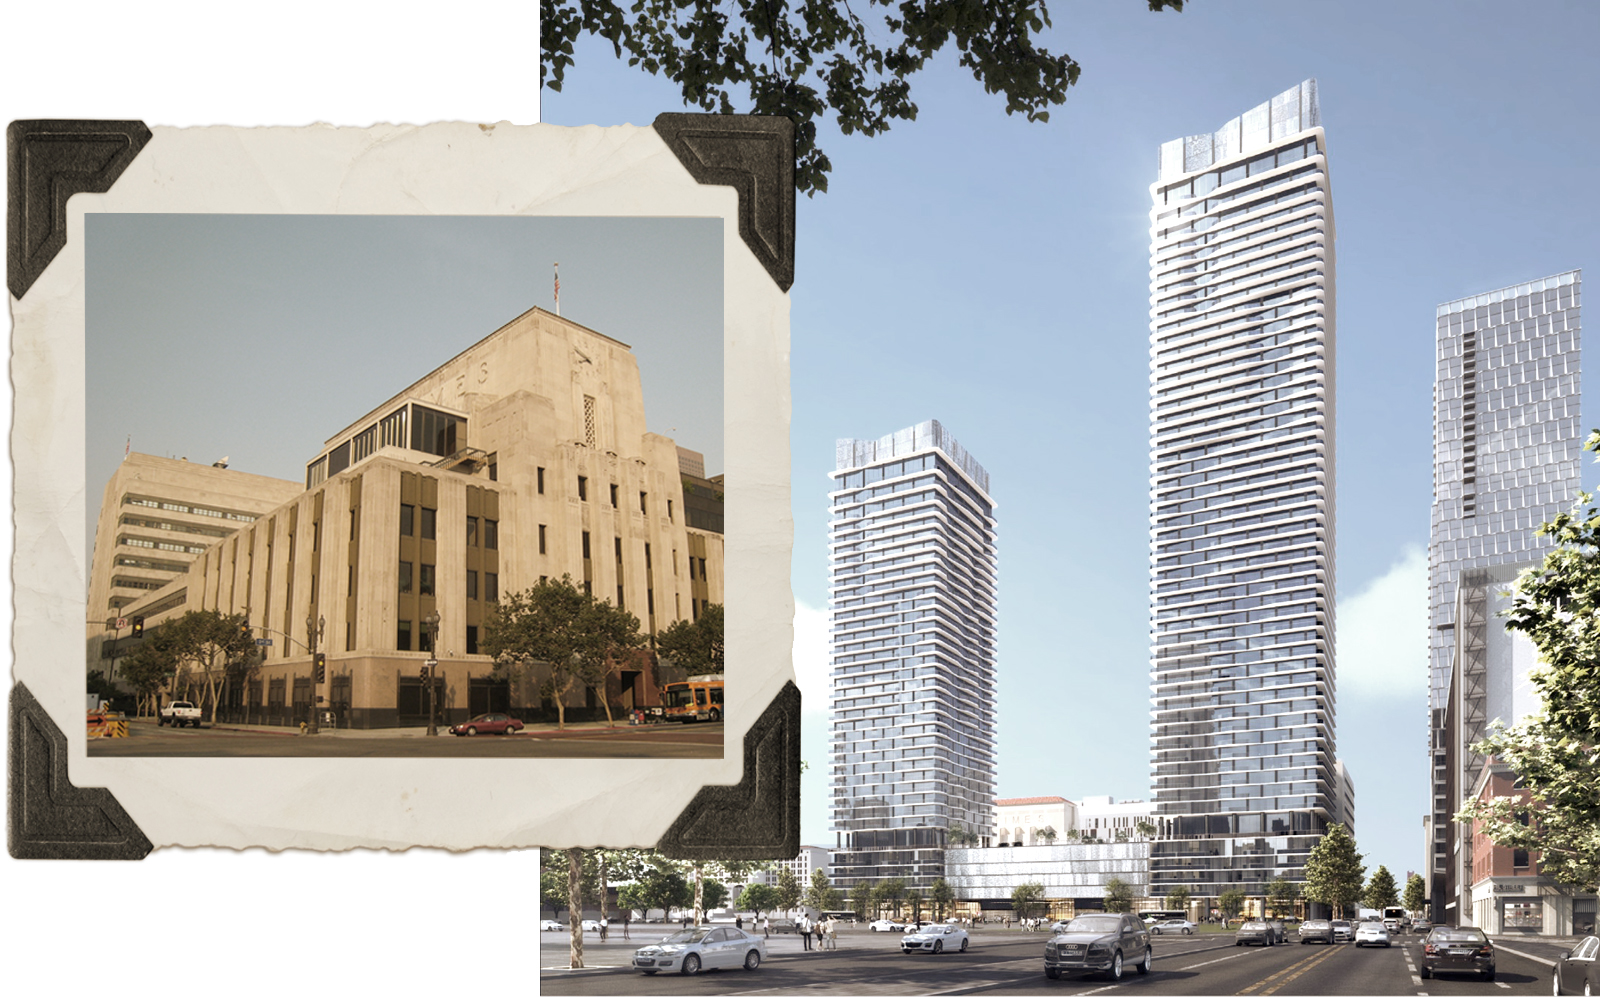 Renderings of Omni's new project, along with the original Times Mirror Square building. (City of Los Angeles Department of City Planning, WikiMedia)